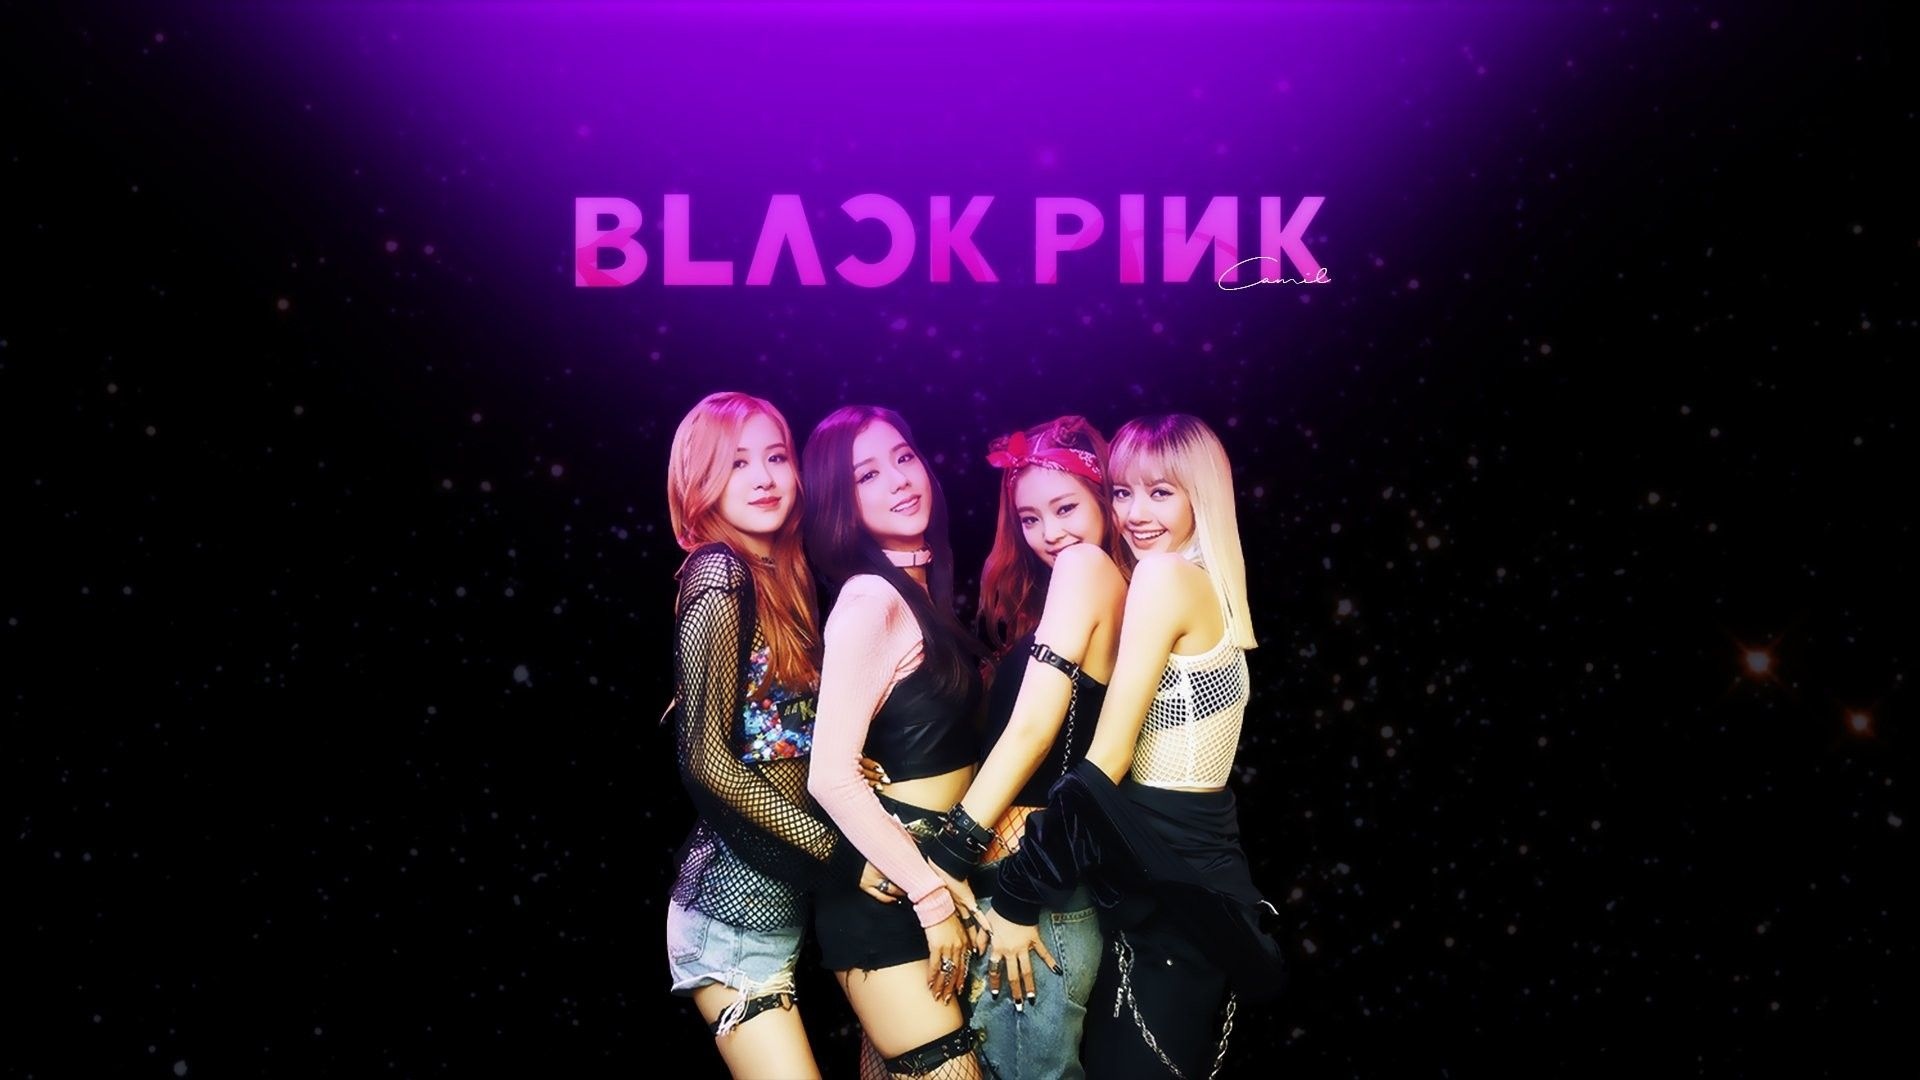 Blackpink Logo Colourful With Group